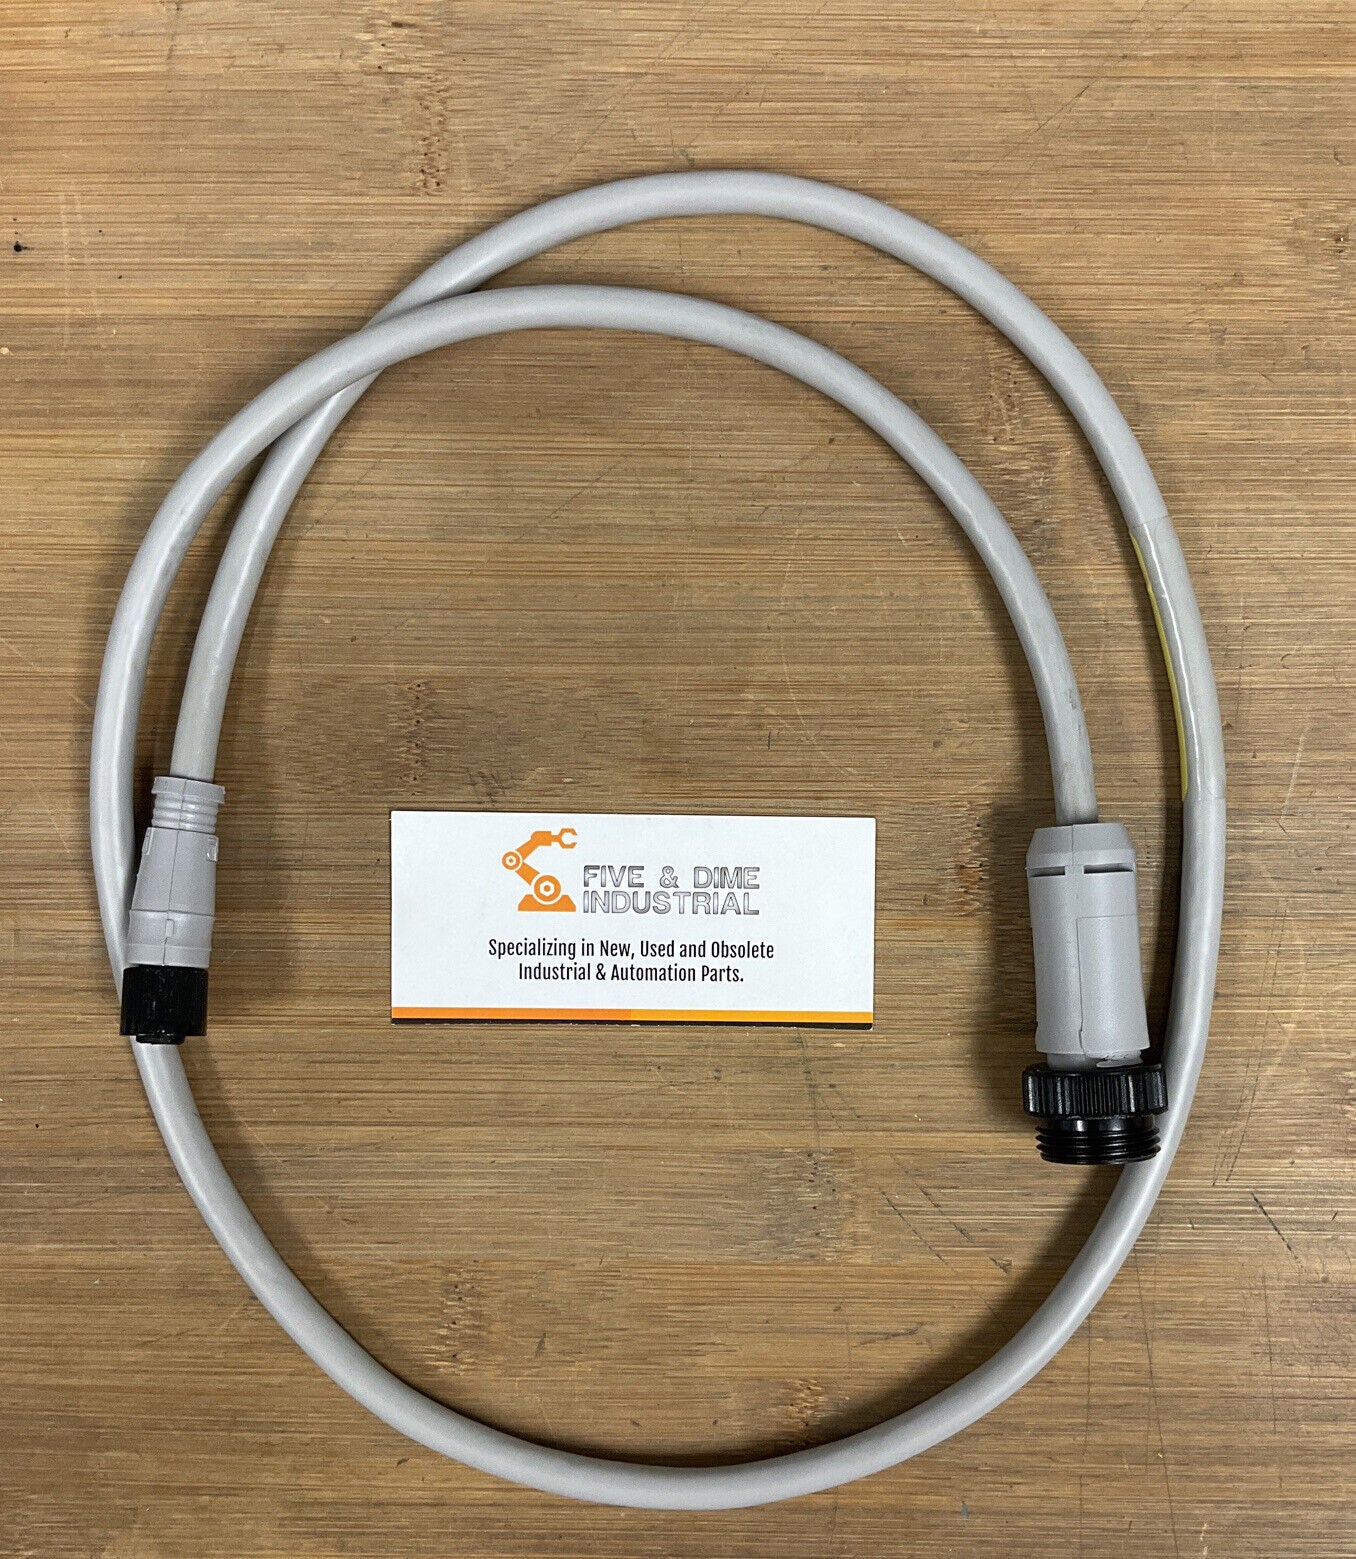 Brad Connectivity DND21A-M010CABLE New ASSEMBLY (CBL116)